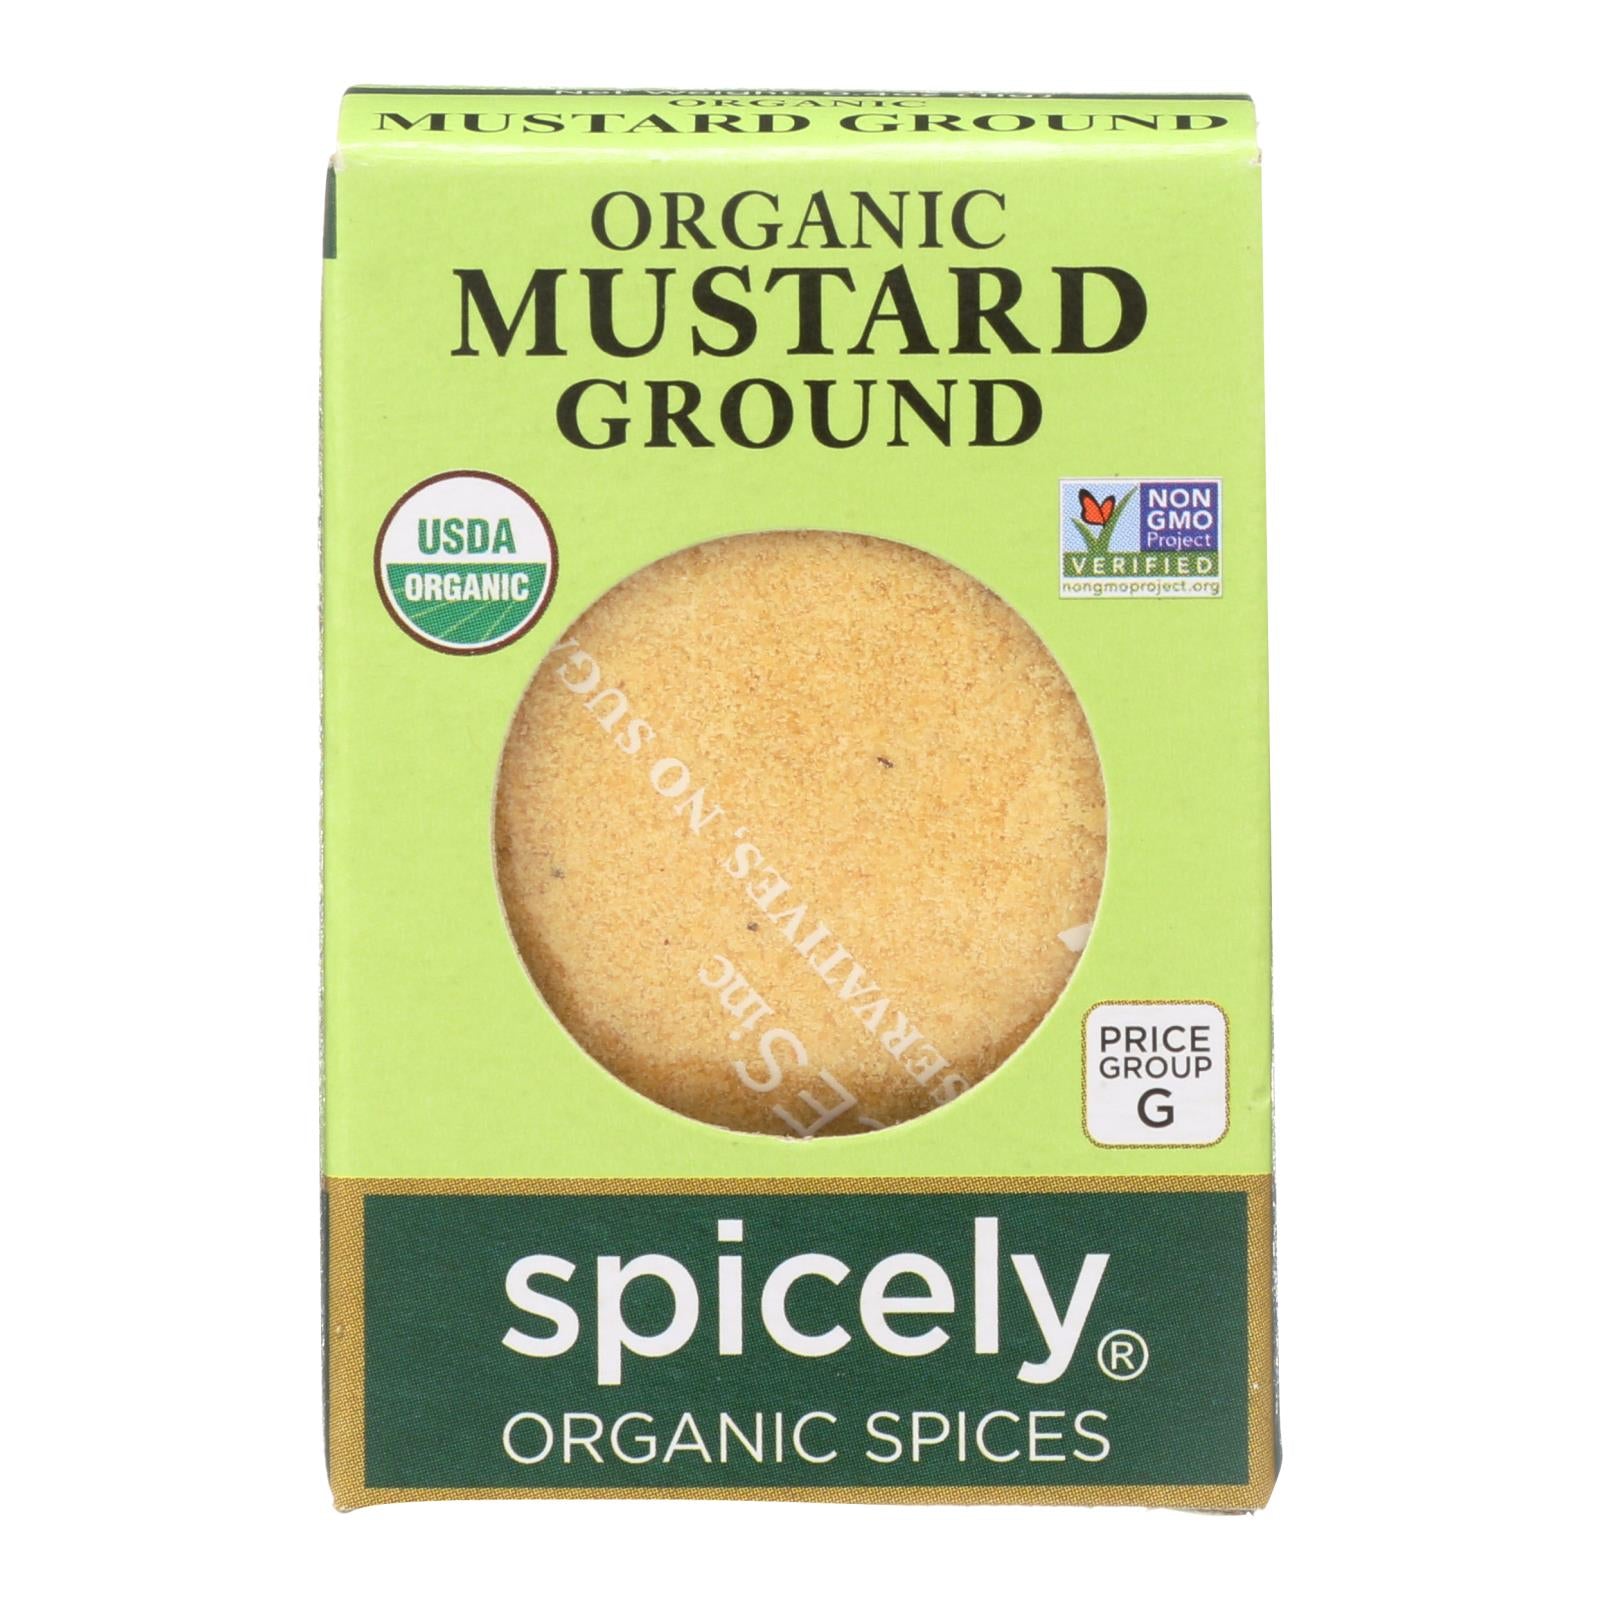 Spicely Organics - Organic Mustard - Ground - Case Of 6 - 0.4 Oz. - Whole Green Foods